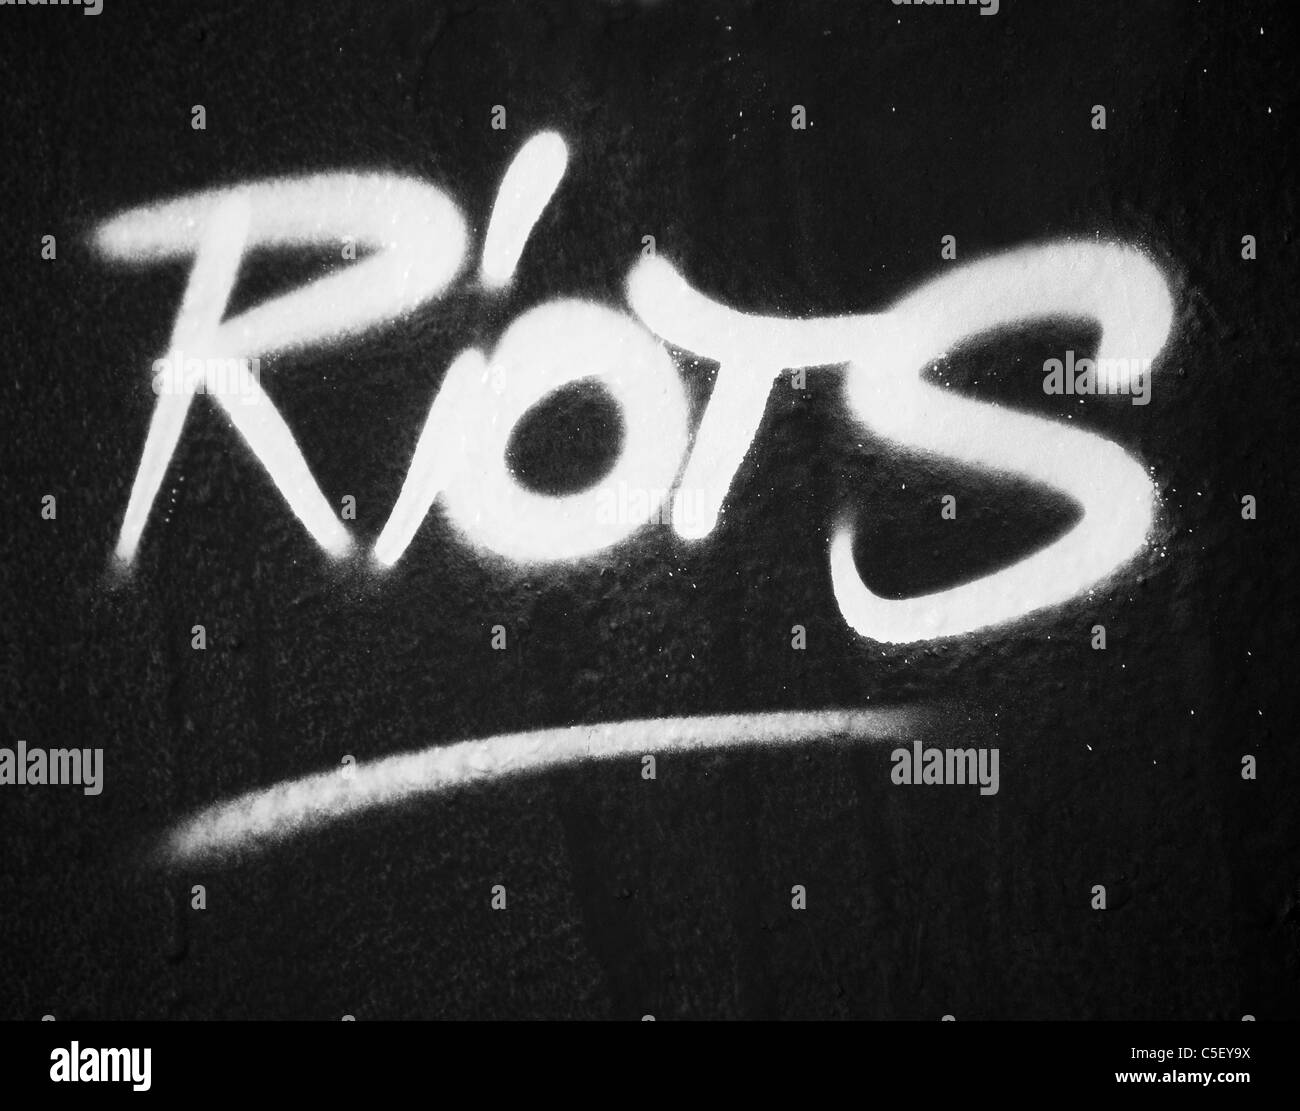 Riots text sprayed on a wall Stock Photo